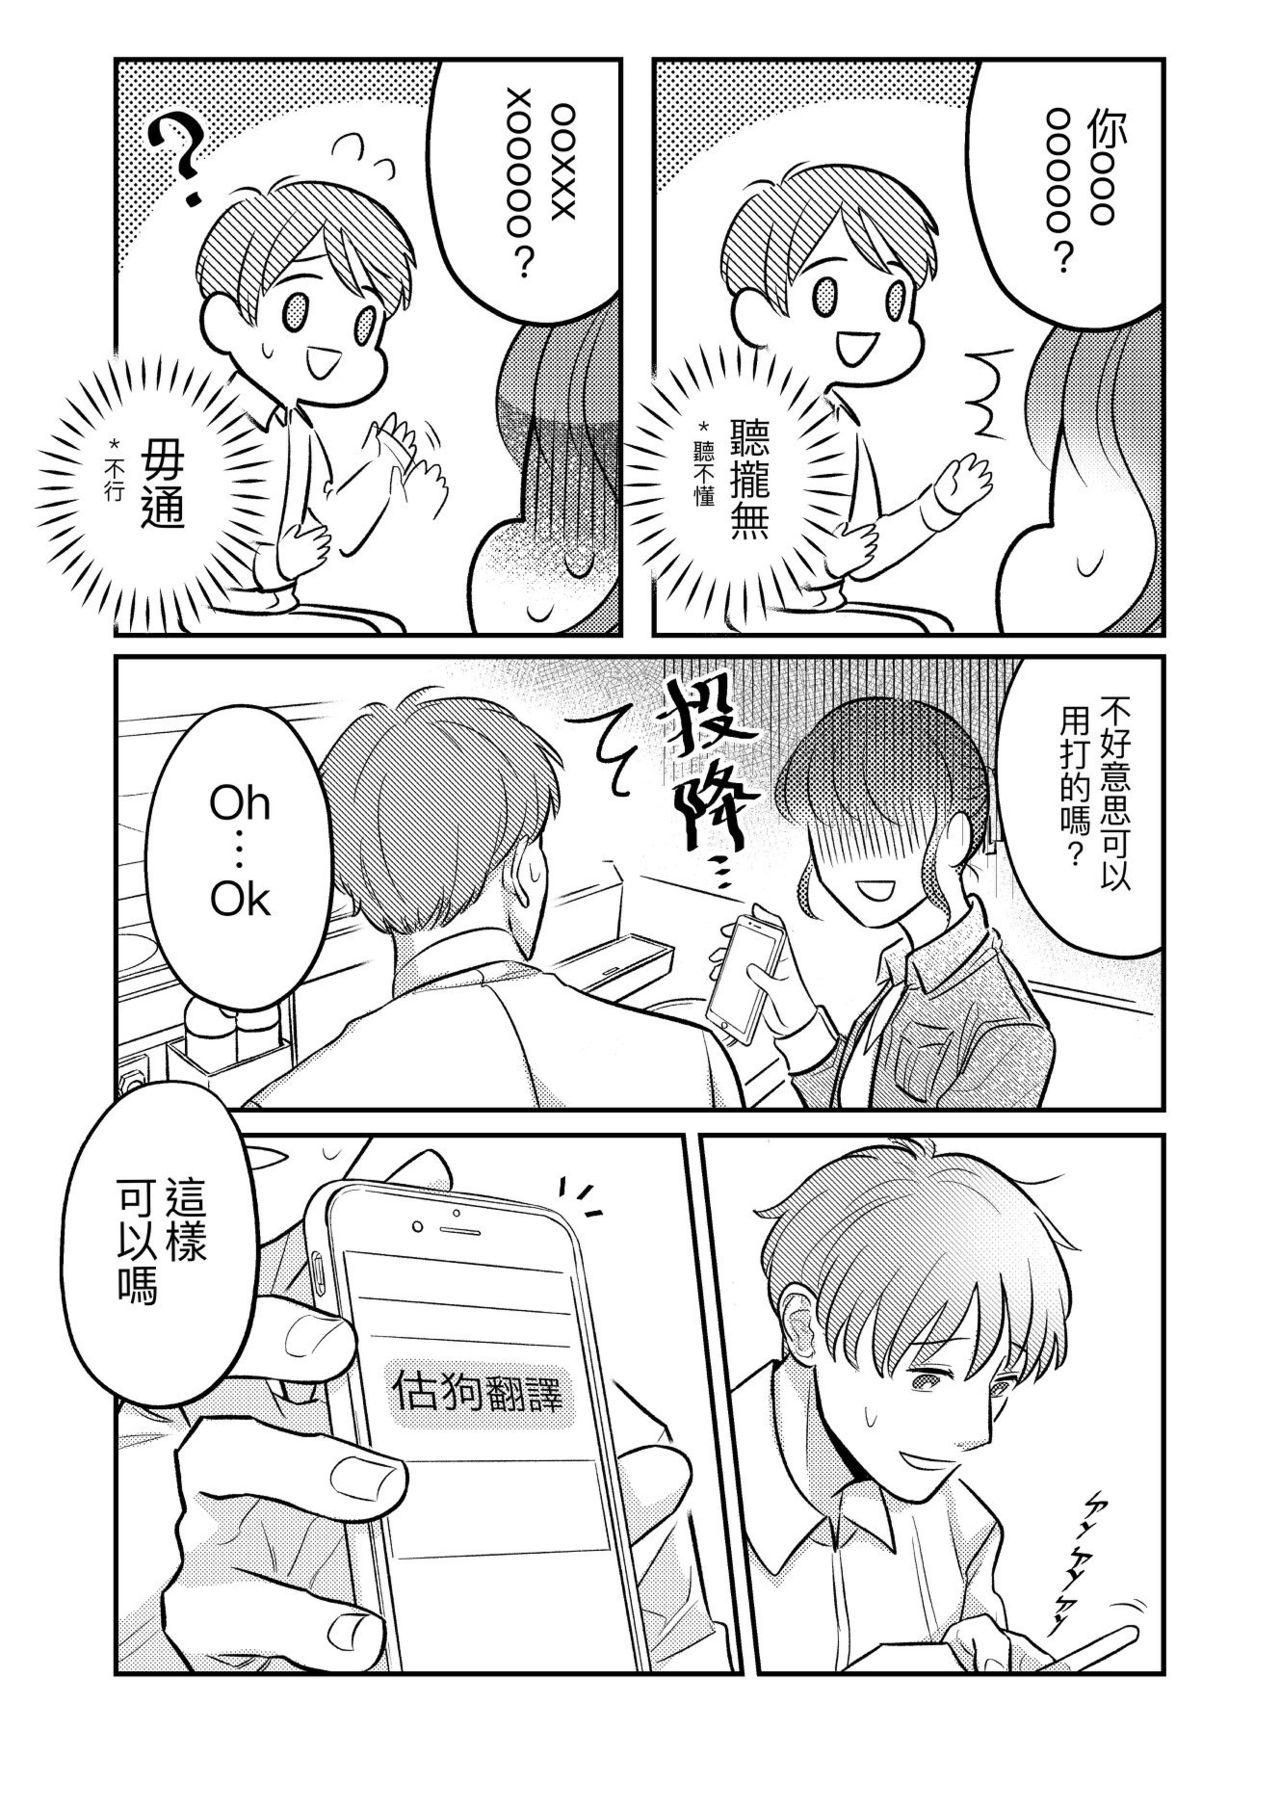 Perfect Tits T子啪啪走2 | T-Chan's Sexual Journey 2 - Original Boss - Page 6